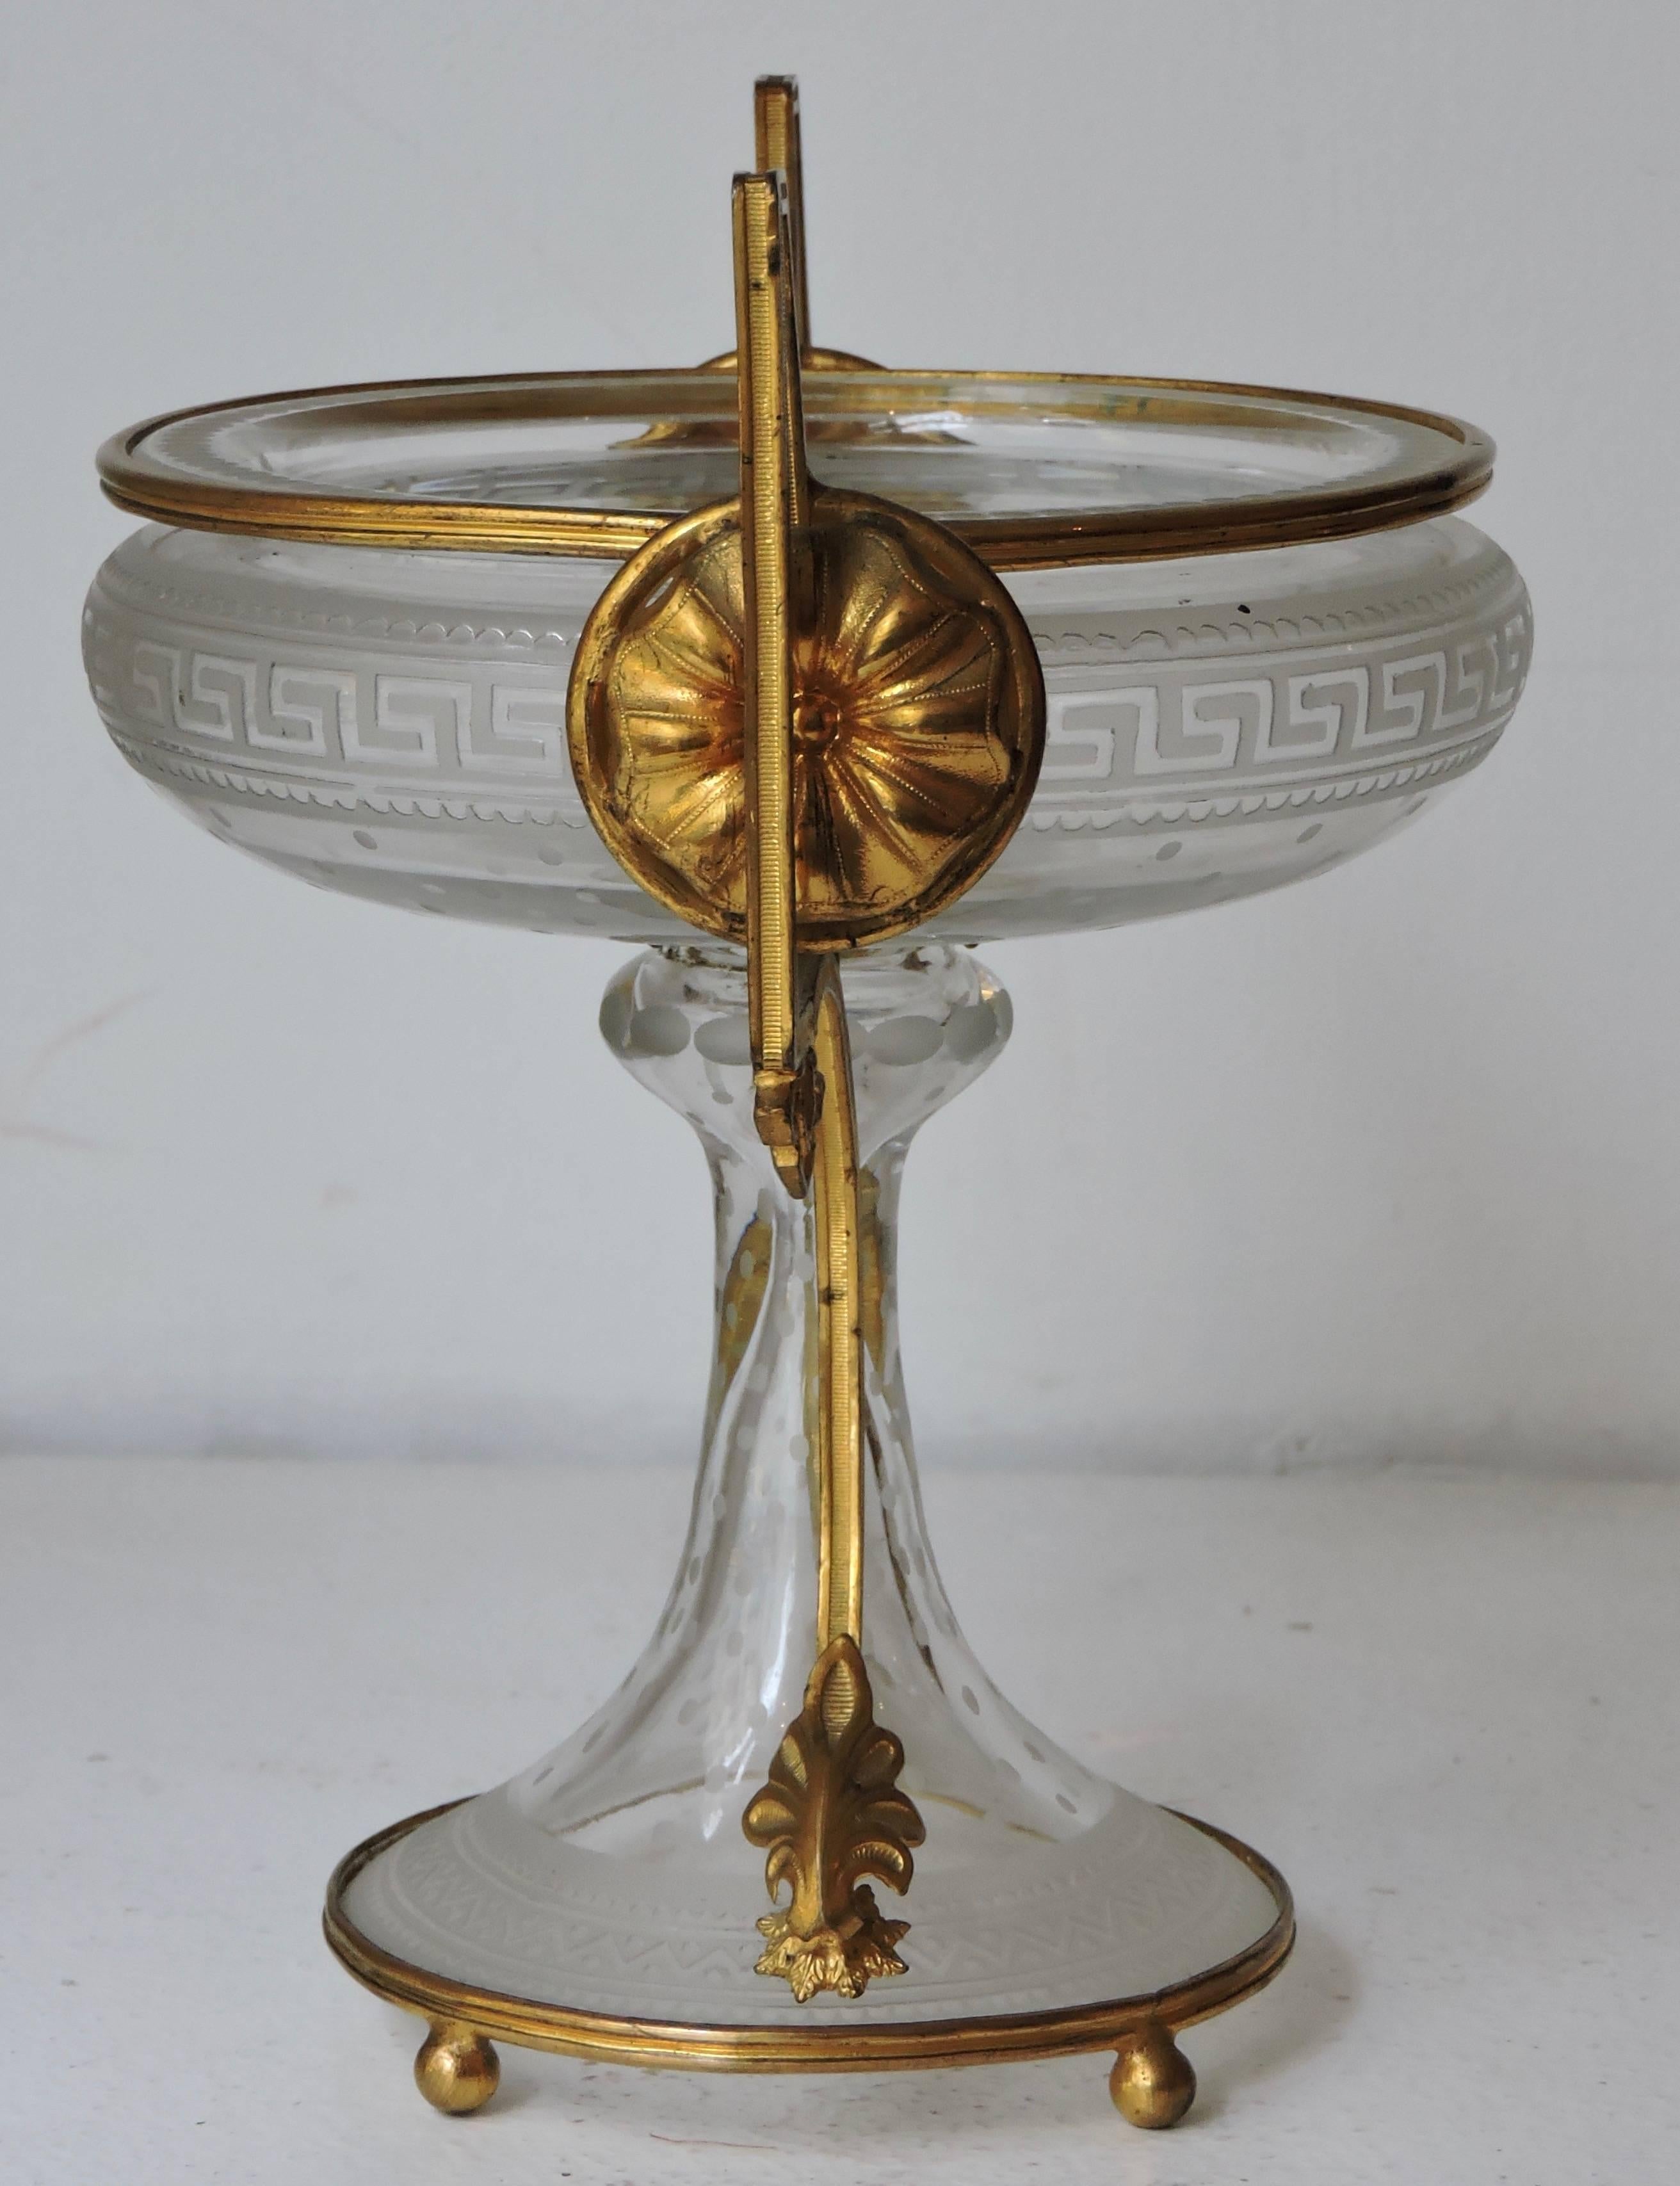 French Neoclassical Engraved and Ormolu-Mounted Crystal Cup, circa 1870